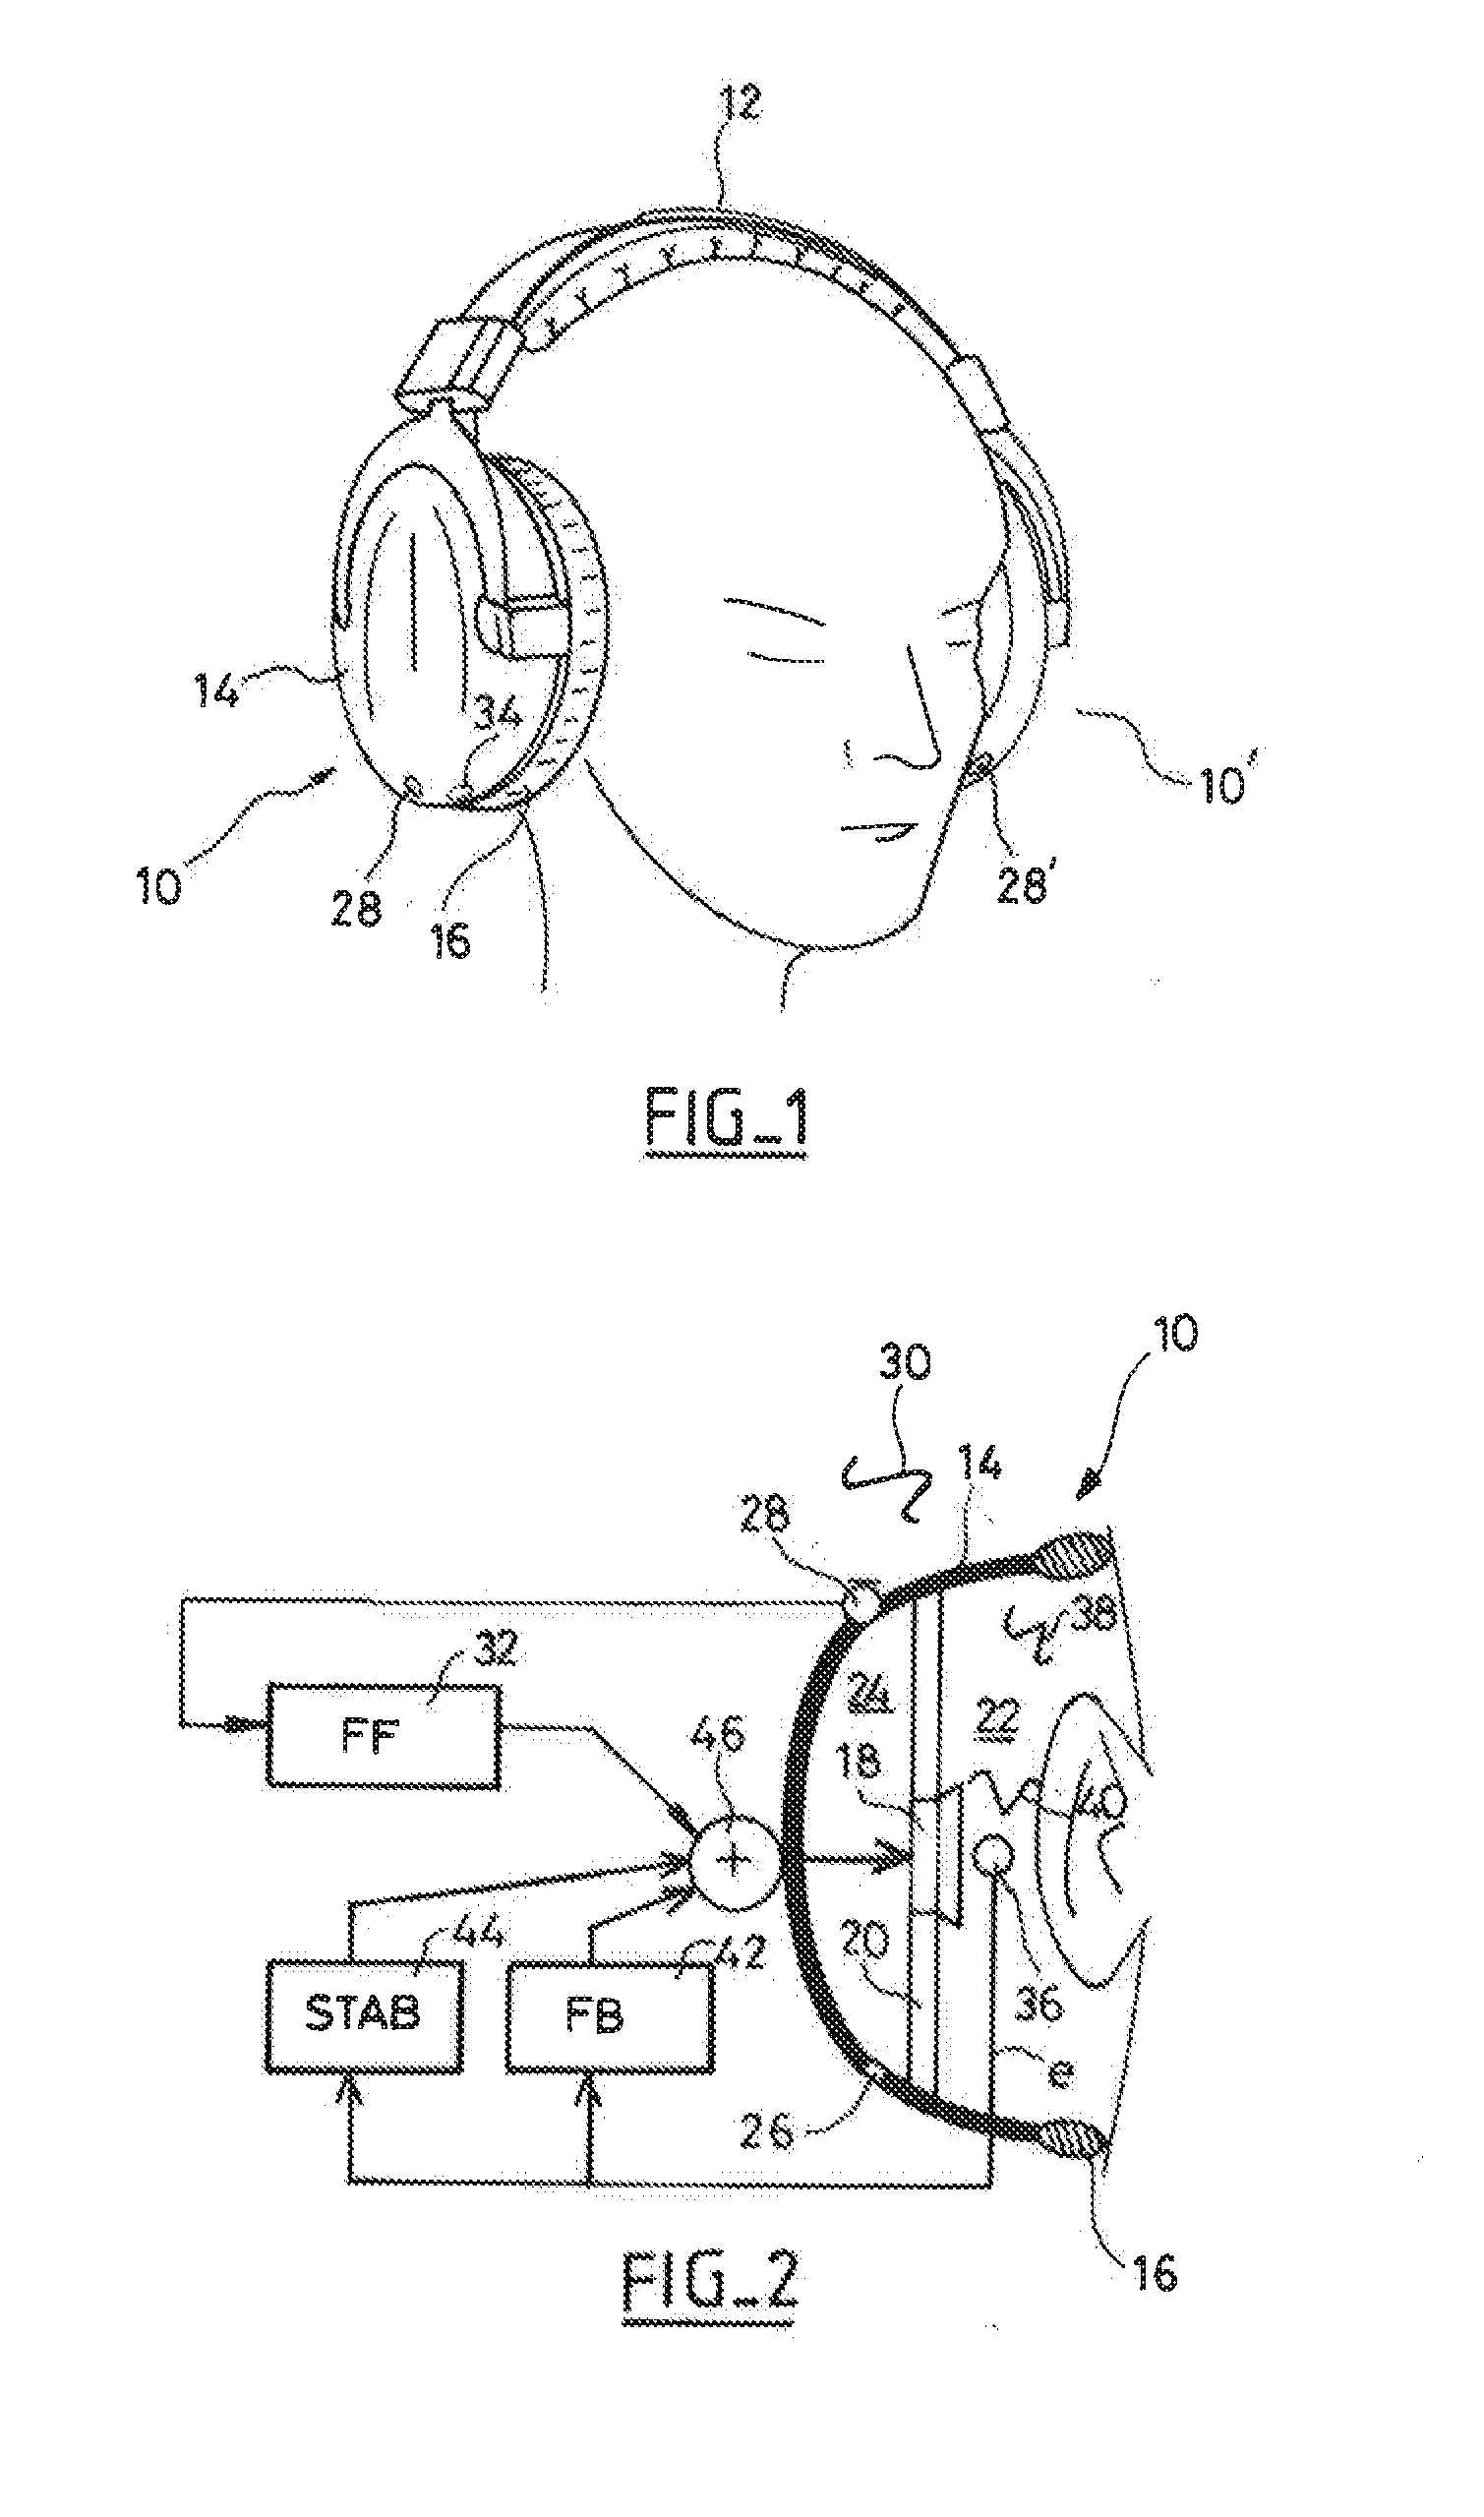 Audio headset with active noise control of the non-adaptive type for  listening to an audio music source  and/or for "hands-free" telephony functions